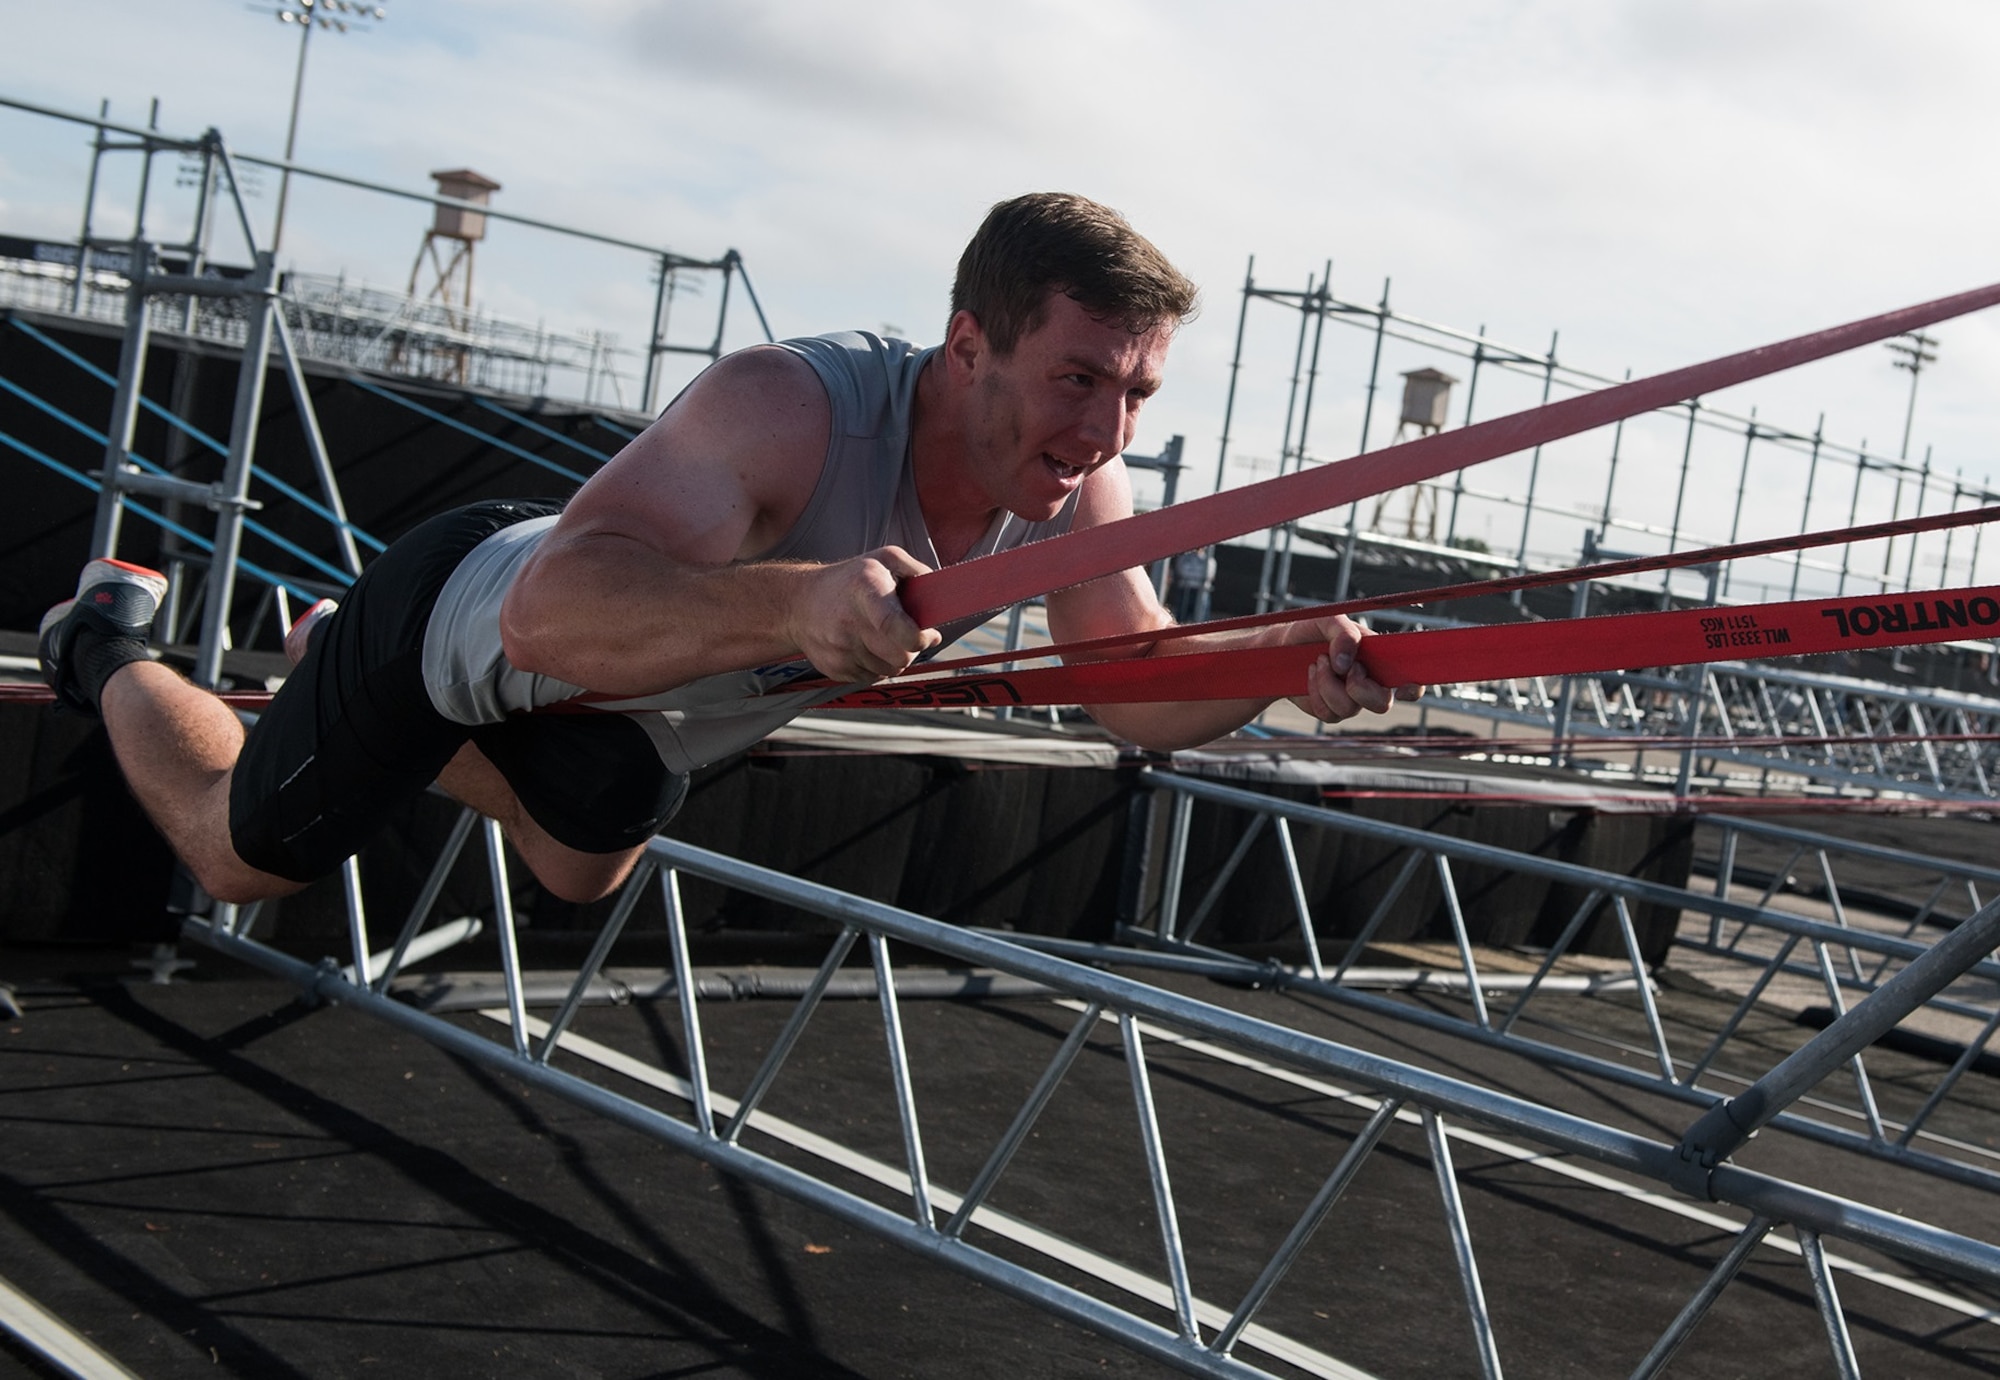 2nd Lt. Jesse Montgomery takes on an obstacle during the 2019 Air Force Alpha Warrior Final Battle at Retama Park, Selma, Texas, Sept. 12, 2019. Air Force, Army and Navy military athletes competed against each other to determine the top three men and three women for each service. Those athletes make up the service teams that will go against each other during the 2019 Inter-Service Battle Sept. 14 at Retama. The Air Force partnered with Alpha Warrior three years ago to deliver functional fitness training to Airmen and their families.